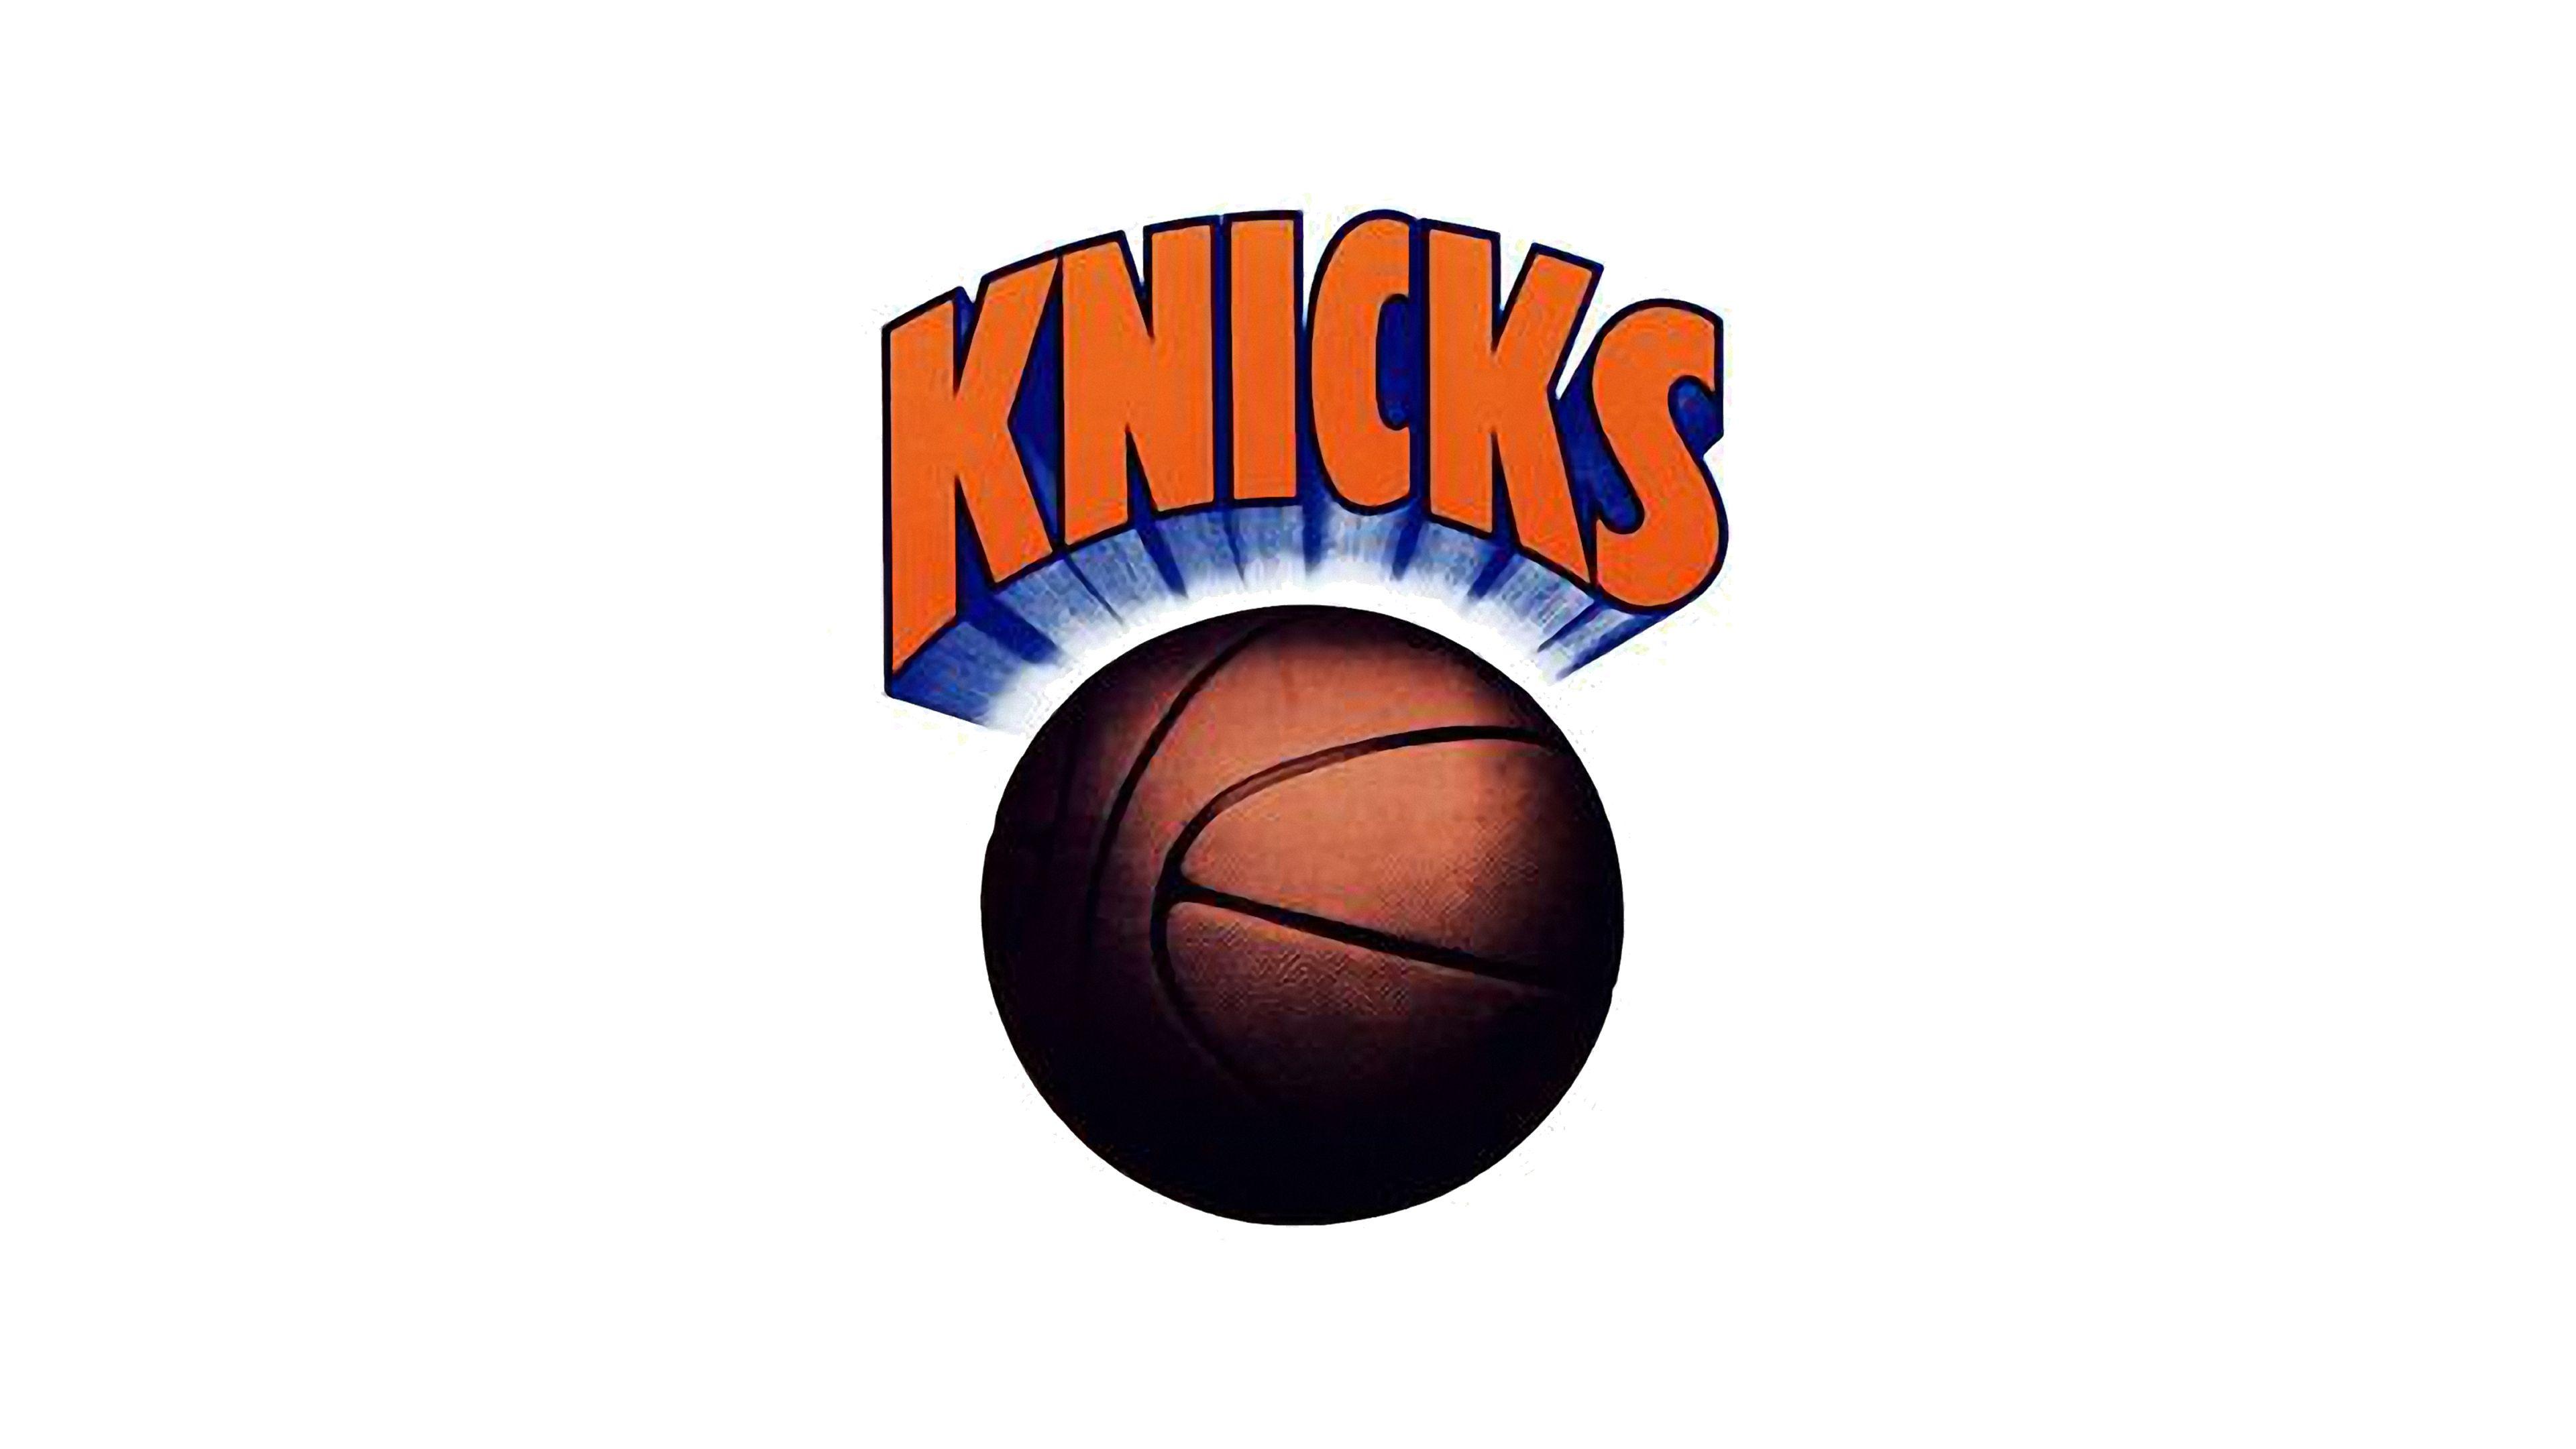 New York Knicks Logo - New York Knicks logo History of the Team Name and emblem